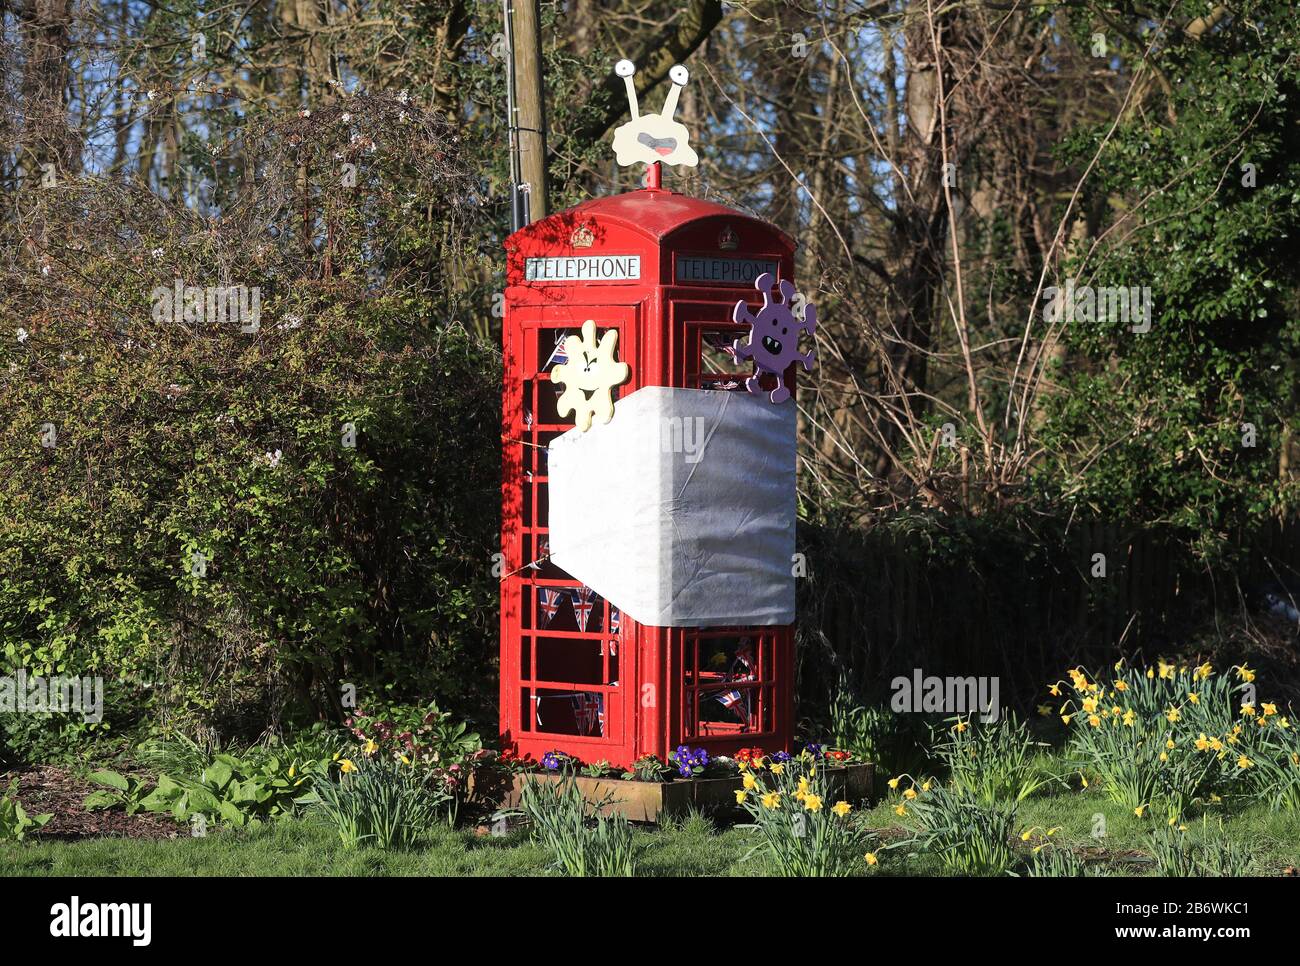 A decommissioned telephone box in the village of Orston, Nottinghamshire, which local residents have decorated with a so-called coronavirus theme, including a giant face mask and cartoon germs. Stock Photo